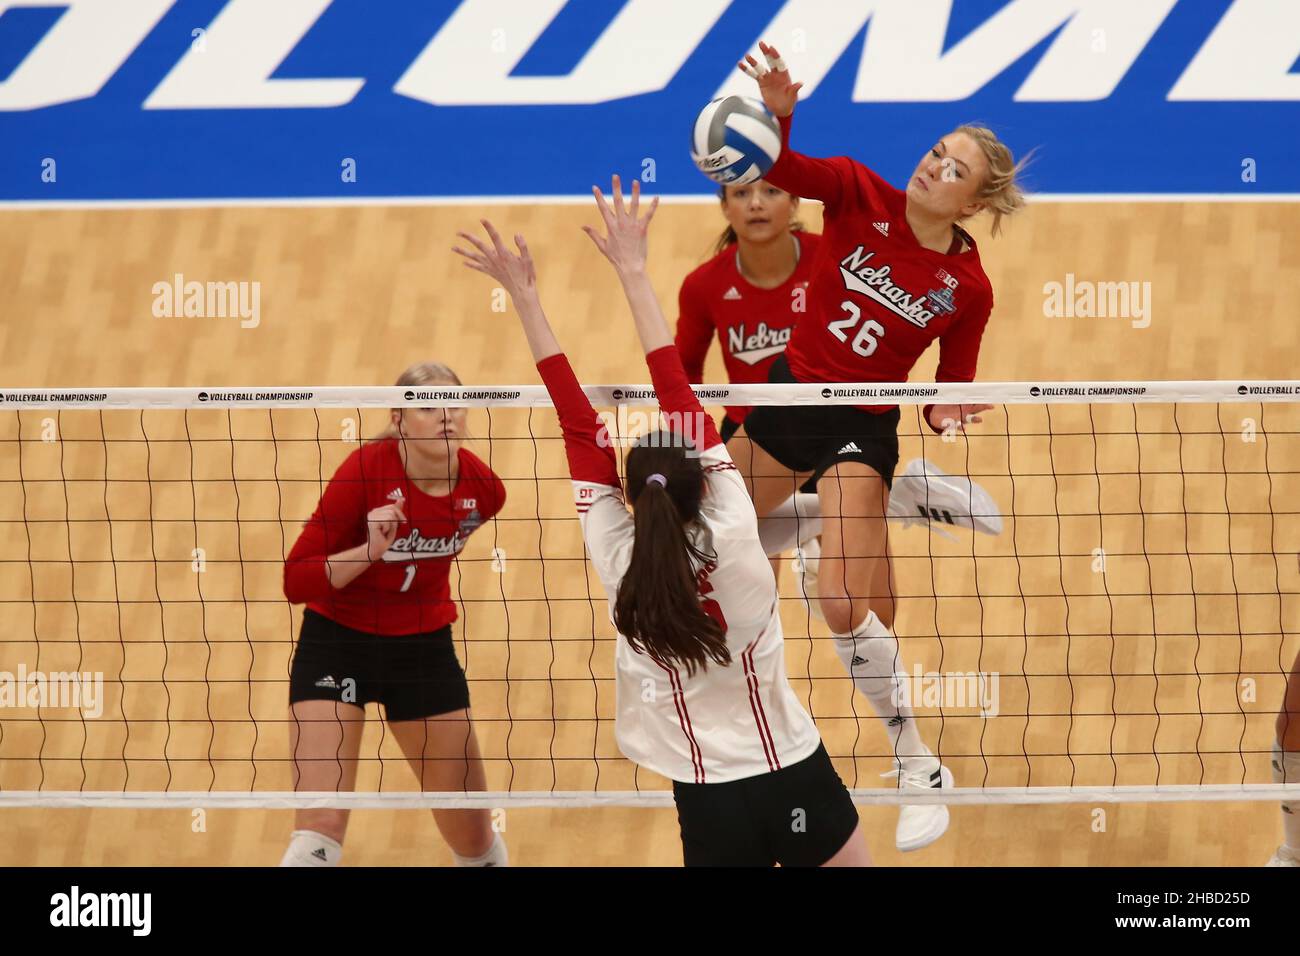 https://c8.alamy.com/comp/2HBD25D/columbus-oh-usa-18th-dec-2021-columbus-oh-20211218-lauren-stivrins-hits-the-ball-against-wisconsin-during-the-division-1-ncaa-womens-volleyball-championship-played-at-nationwide-arena-in-columbus-oh-photo-by-wally-nellvolleyball-magazine-credit-image-wally-nellzuma-press-wire-credit-zuma-press-incalamy-live-news-2HBD25D.jpg